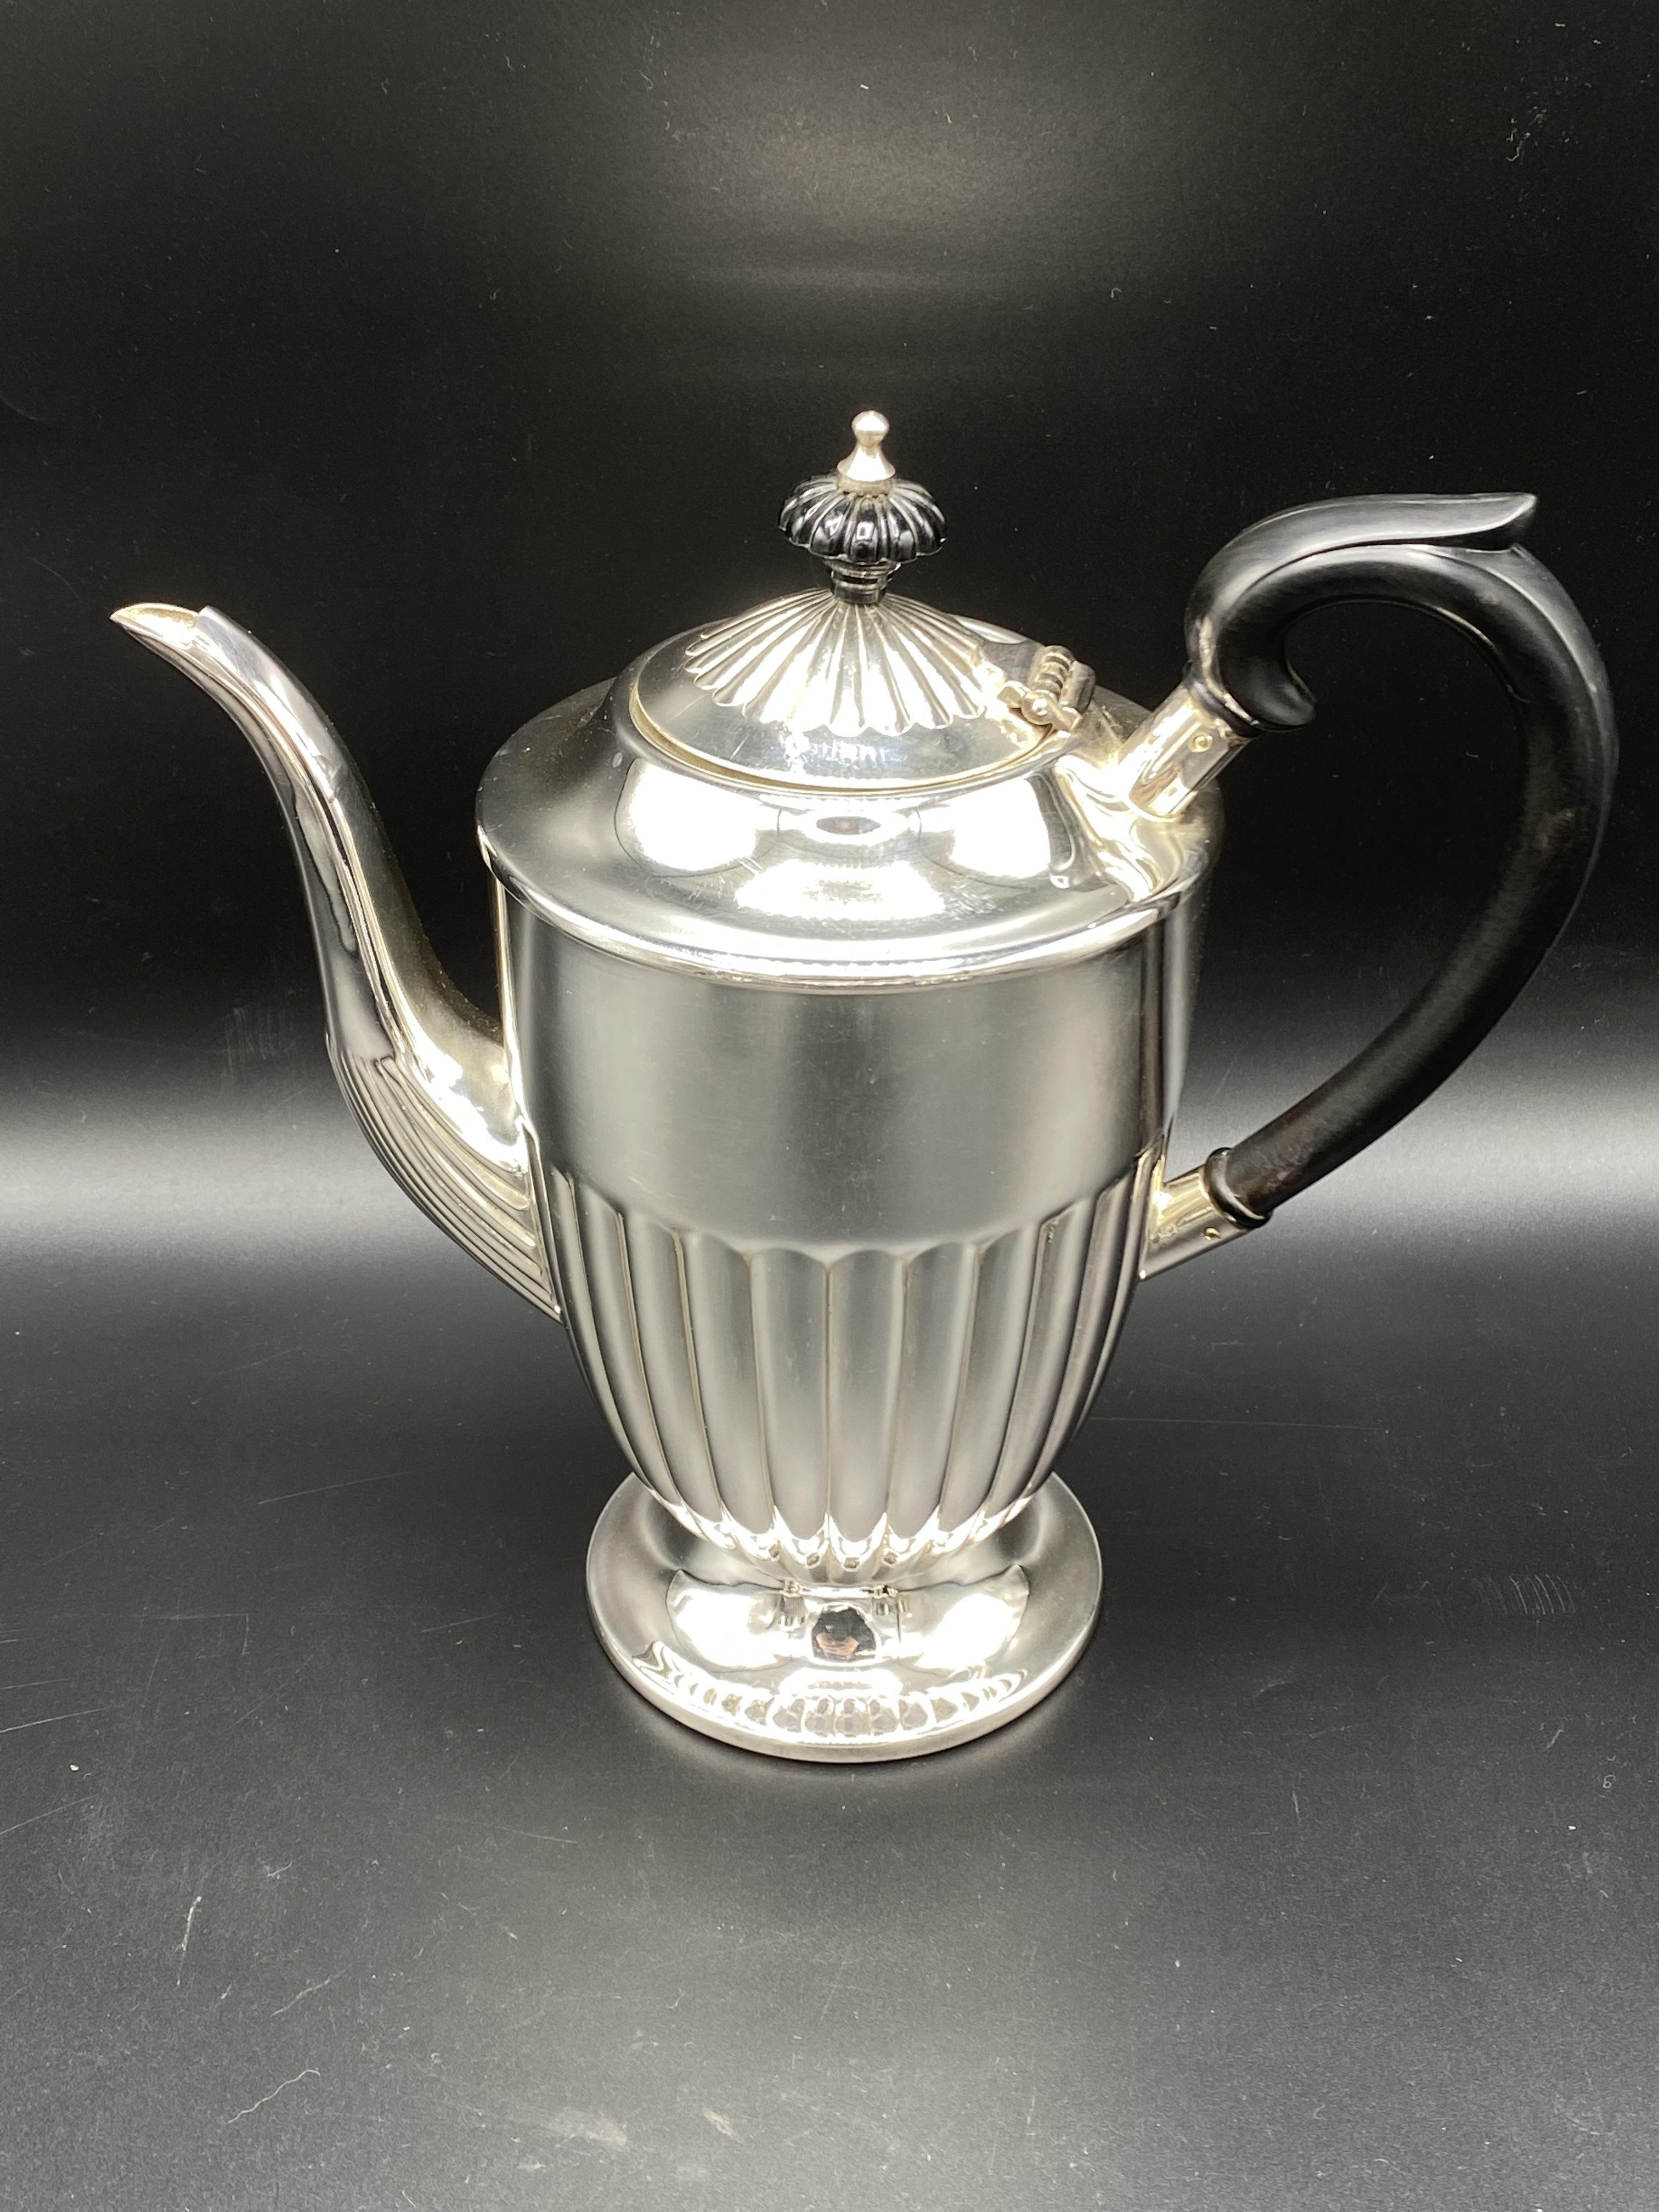 Mappin & Webb silver plate tea and coffee set - Image 3 of 11